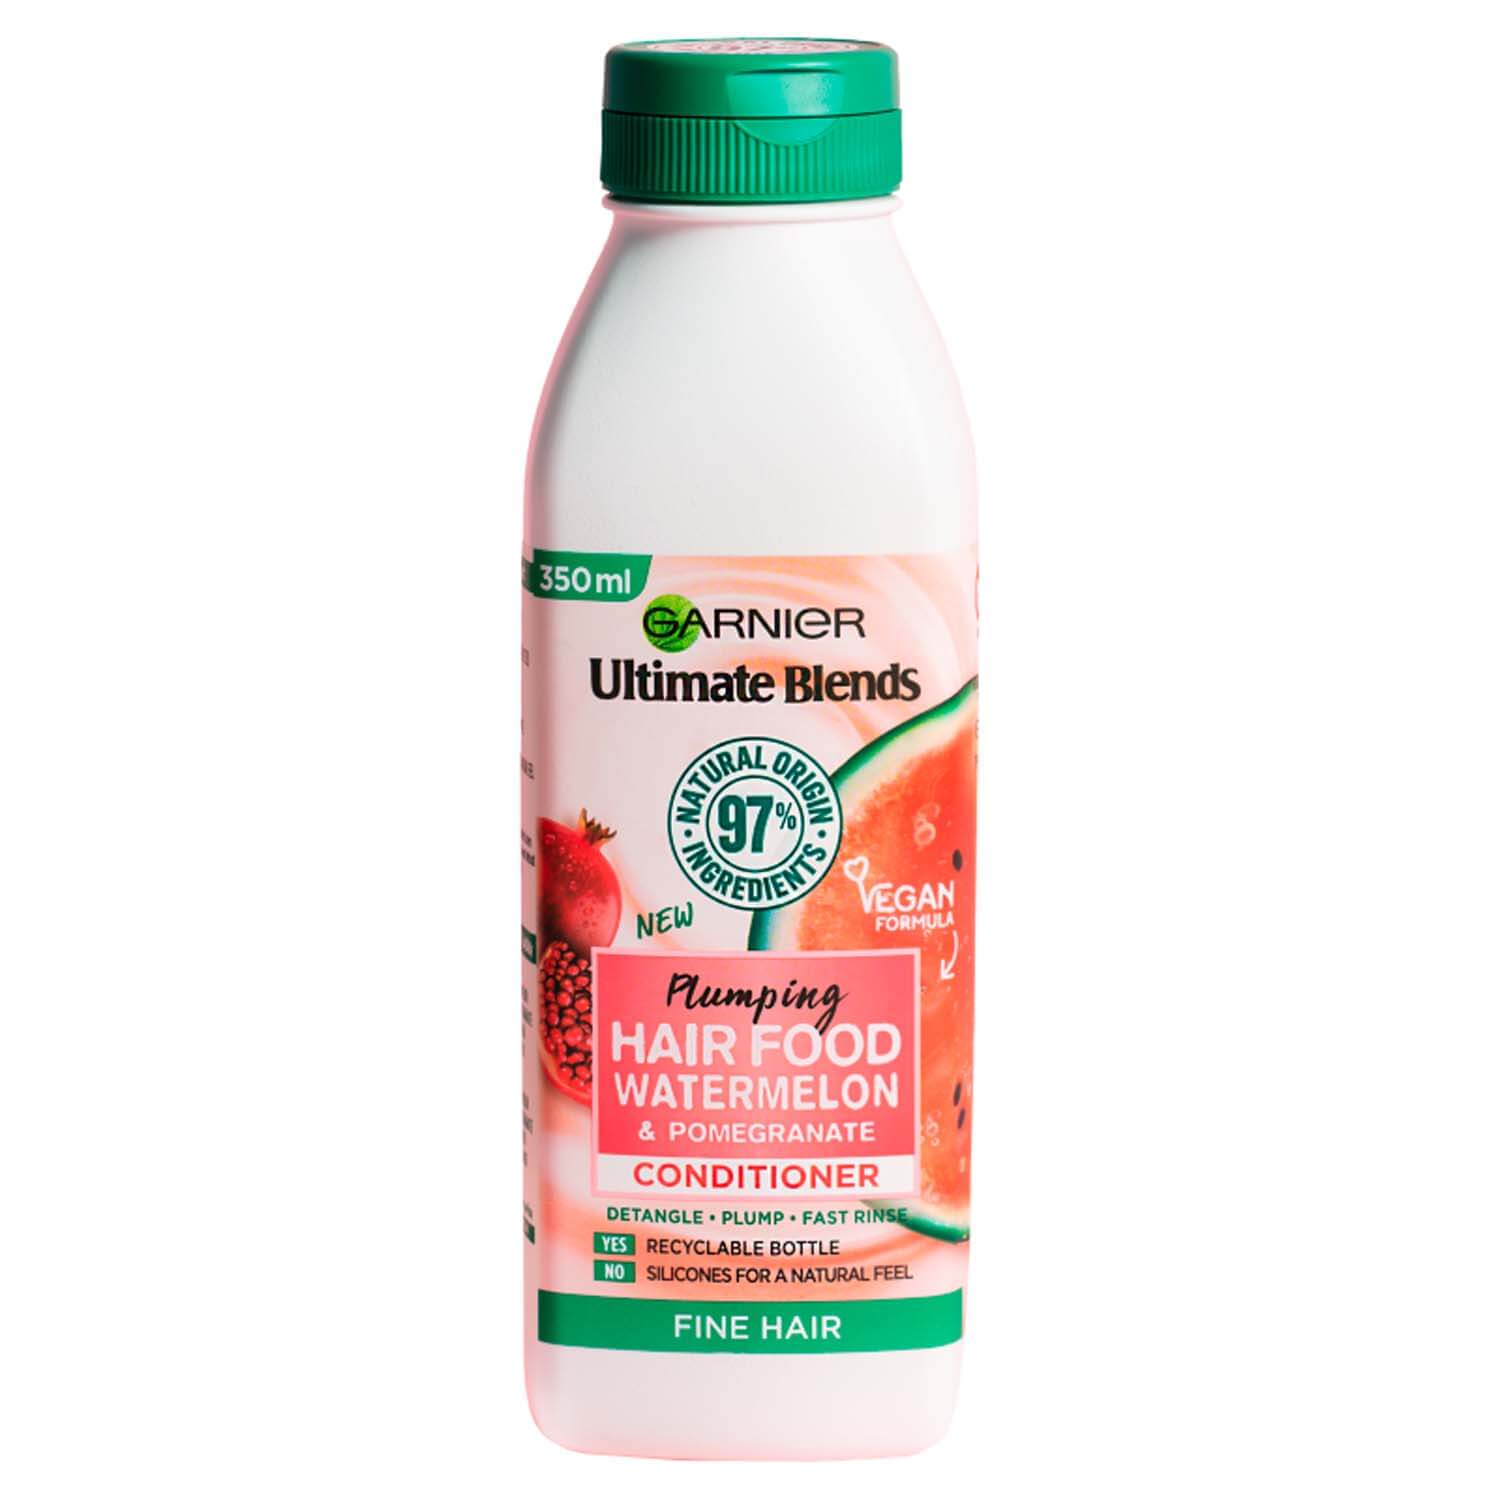 Garnier Ultimate Blends Plumping Hair Food Watermelon Conditioner - 350ml 1 Shaws Department Stores